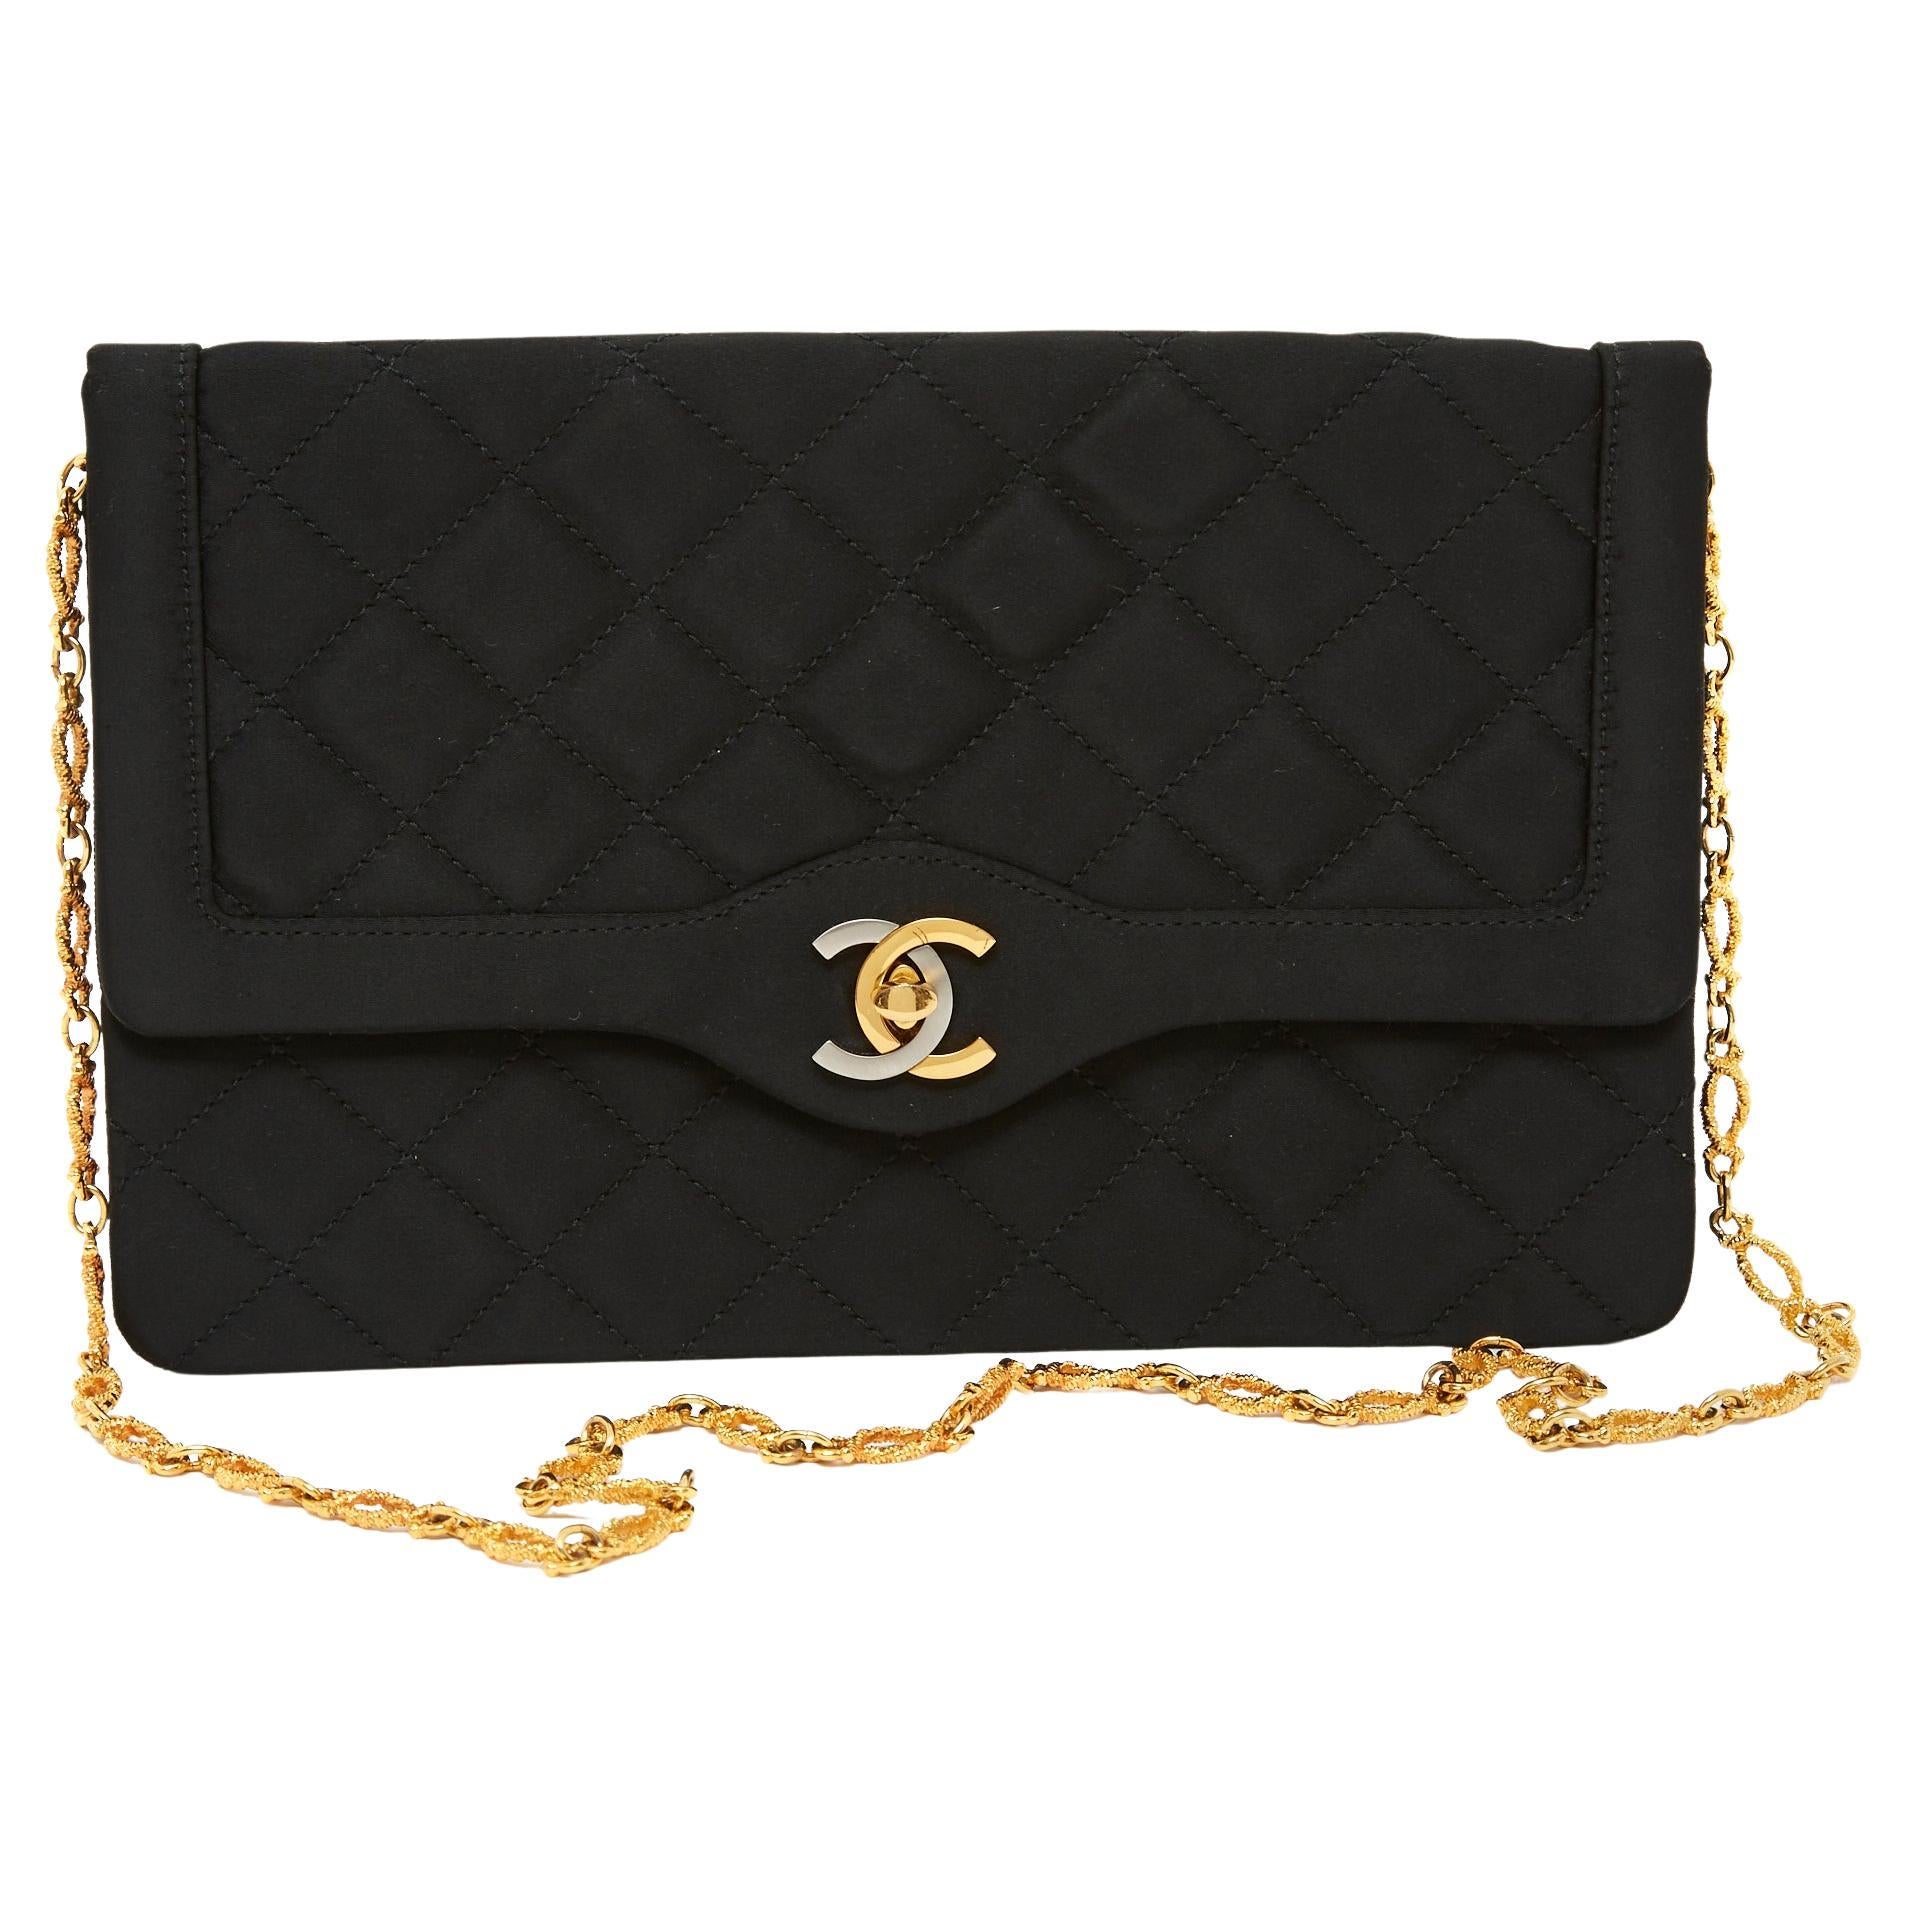 Chanel Bag 1996 Haute Couture Quilted silk satin black 